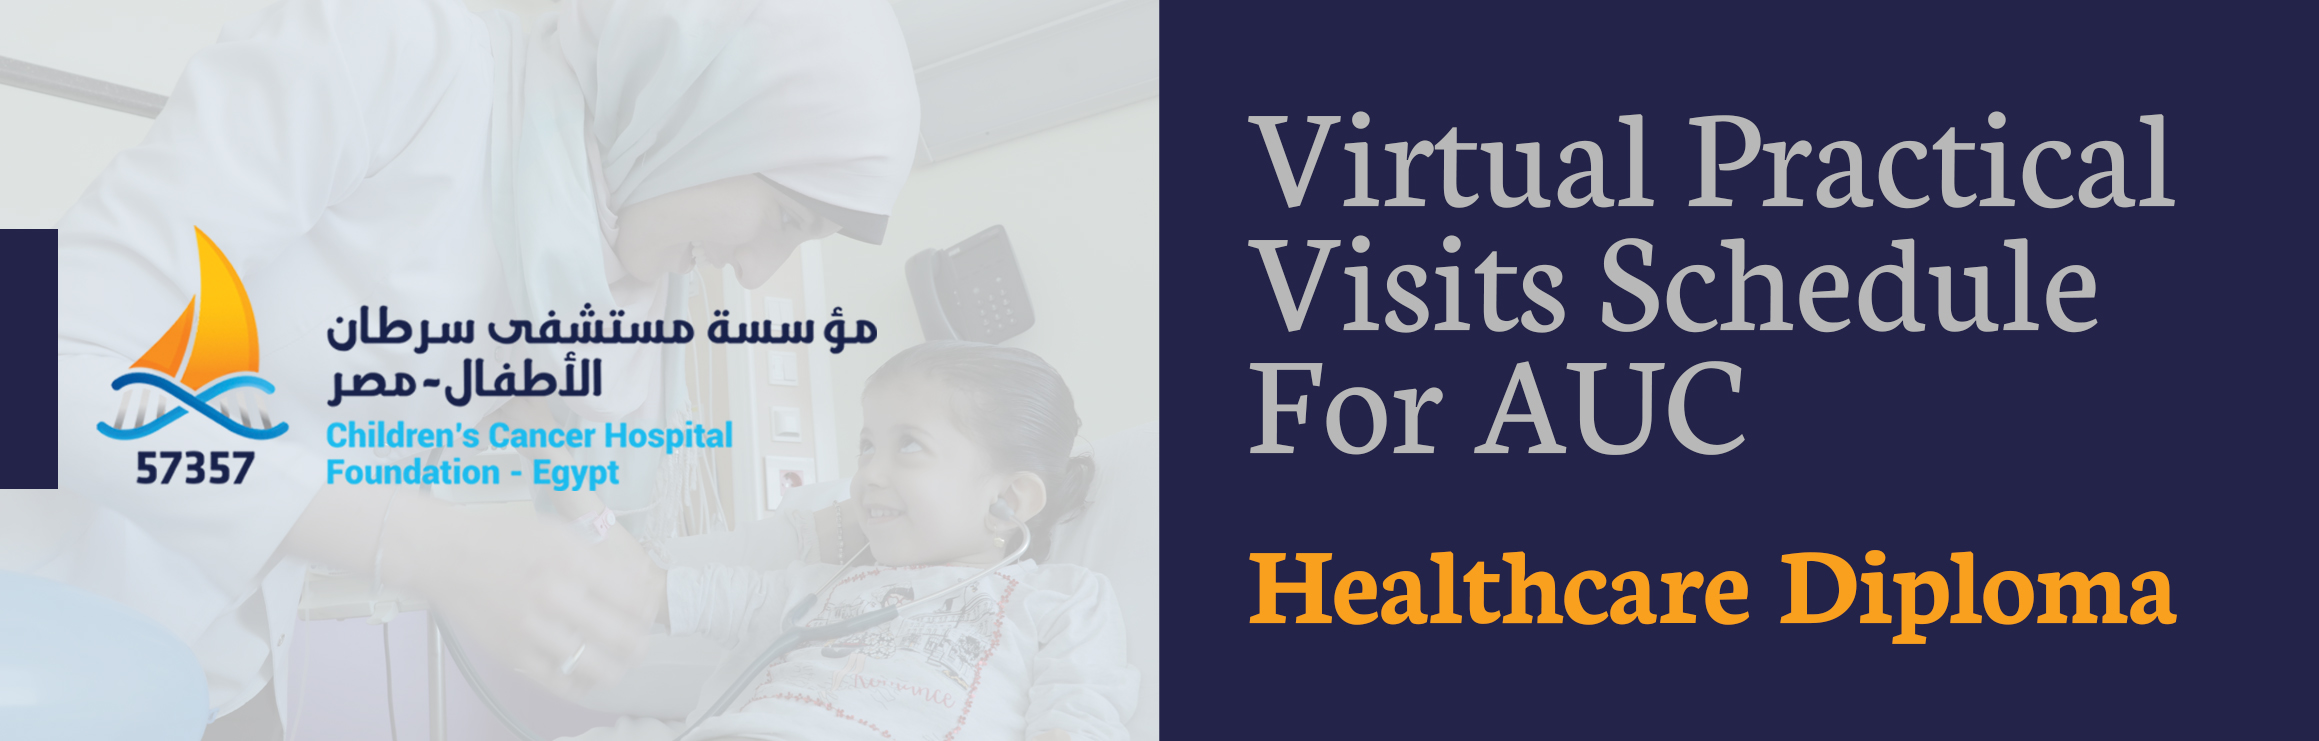 Virtual Practical Visits Schedule for AUC Healthcare Diploma (OE Run 3)